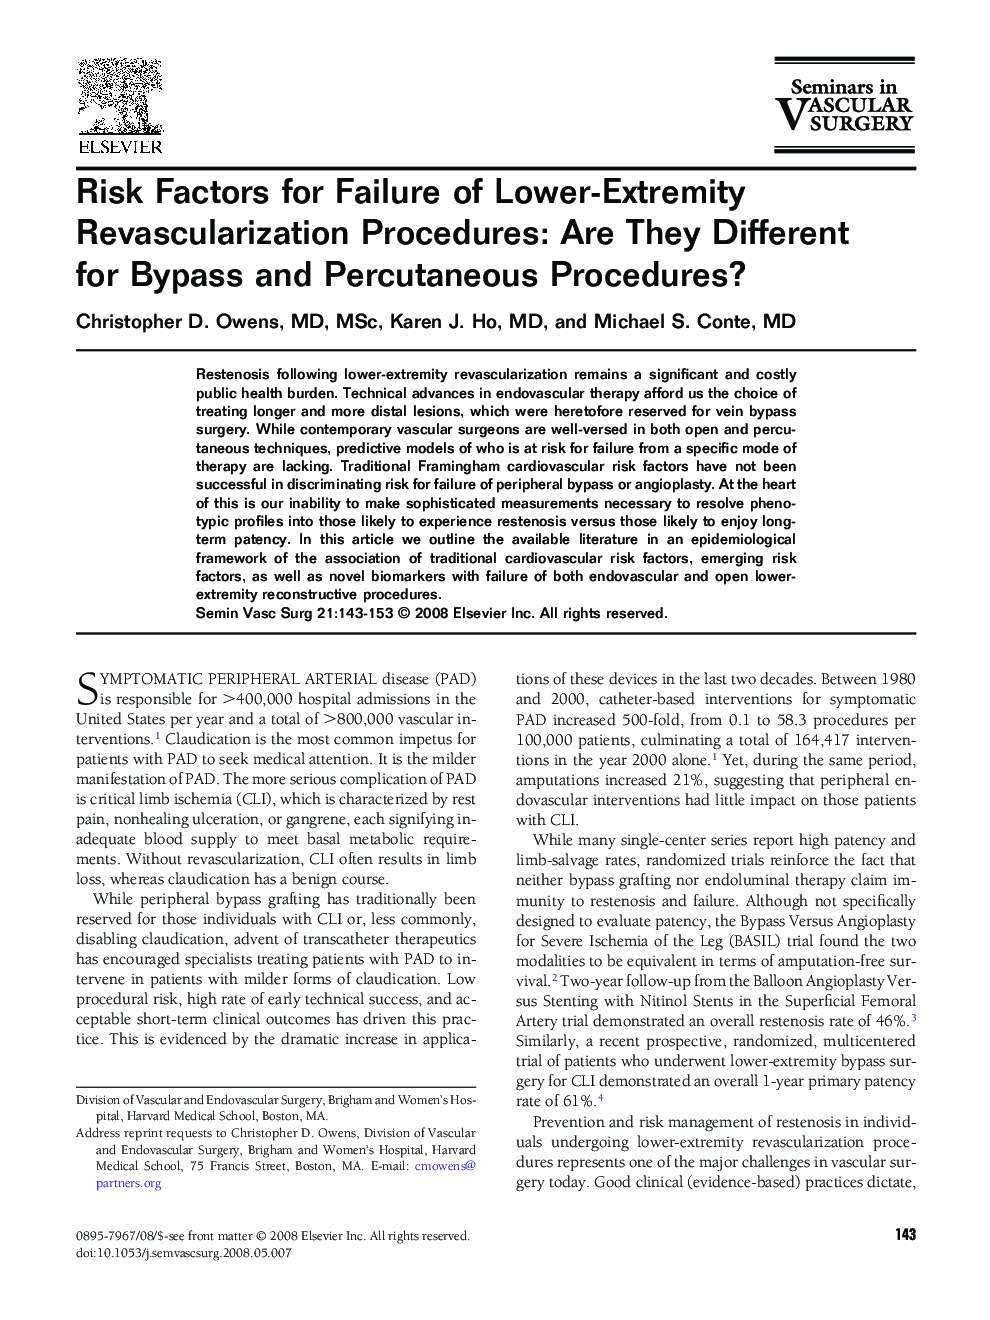 Risk Factors for Failure of Lower-Extremity Revascularization Procedures: Are They Different for Bypass and Percutaneous Procedures?